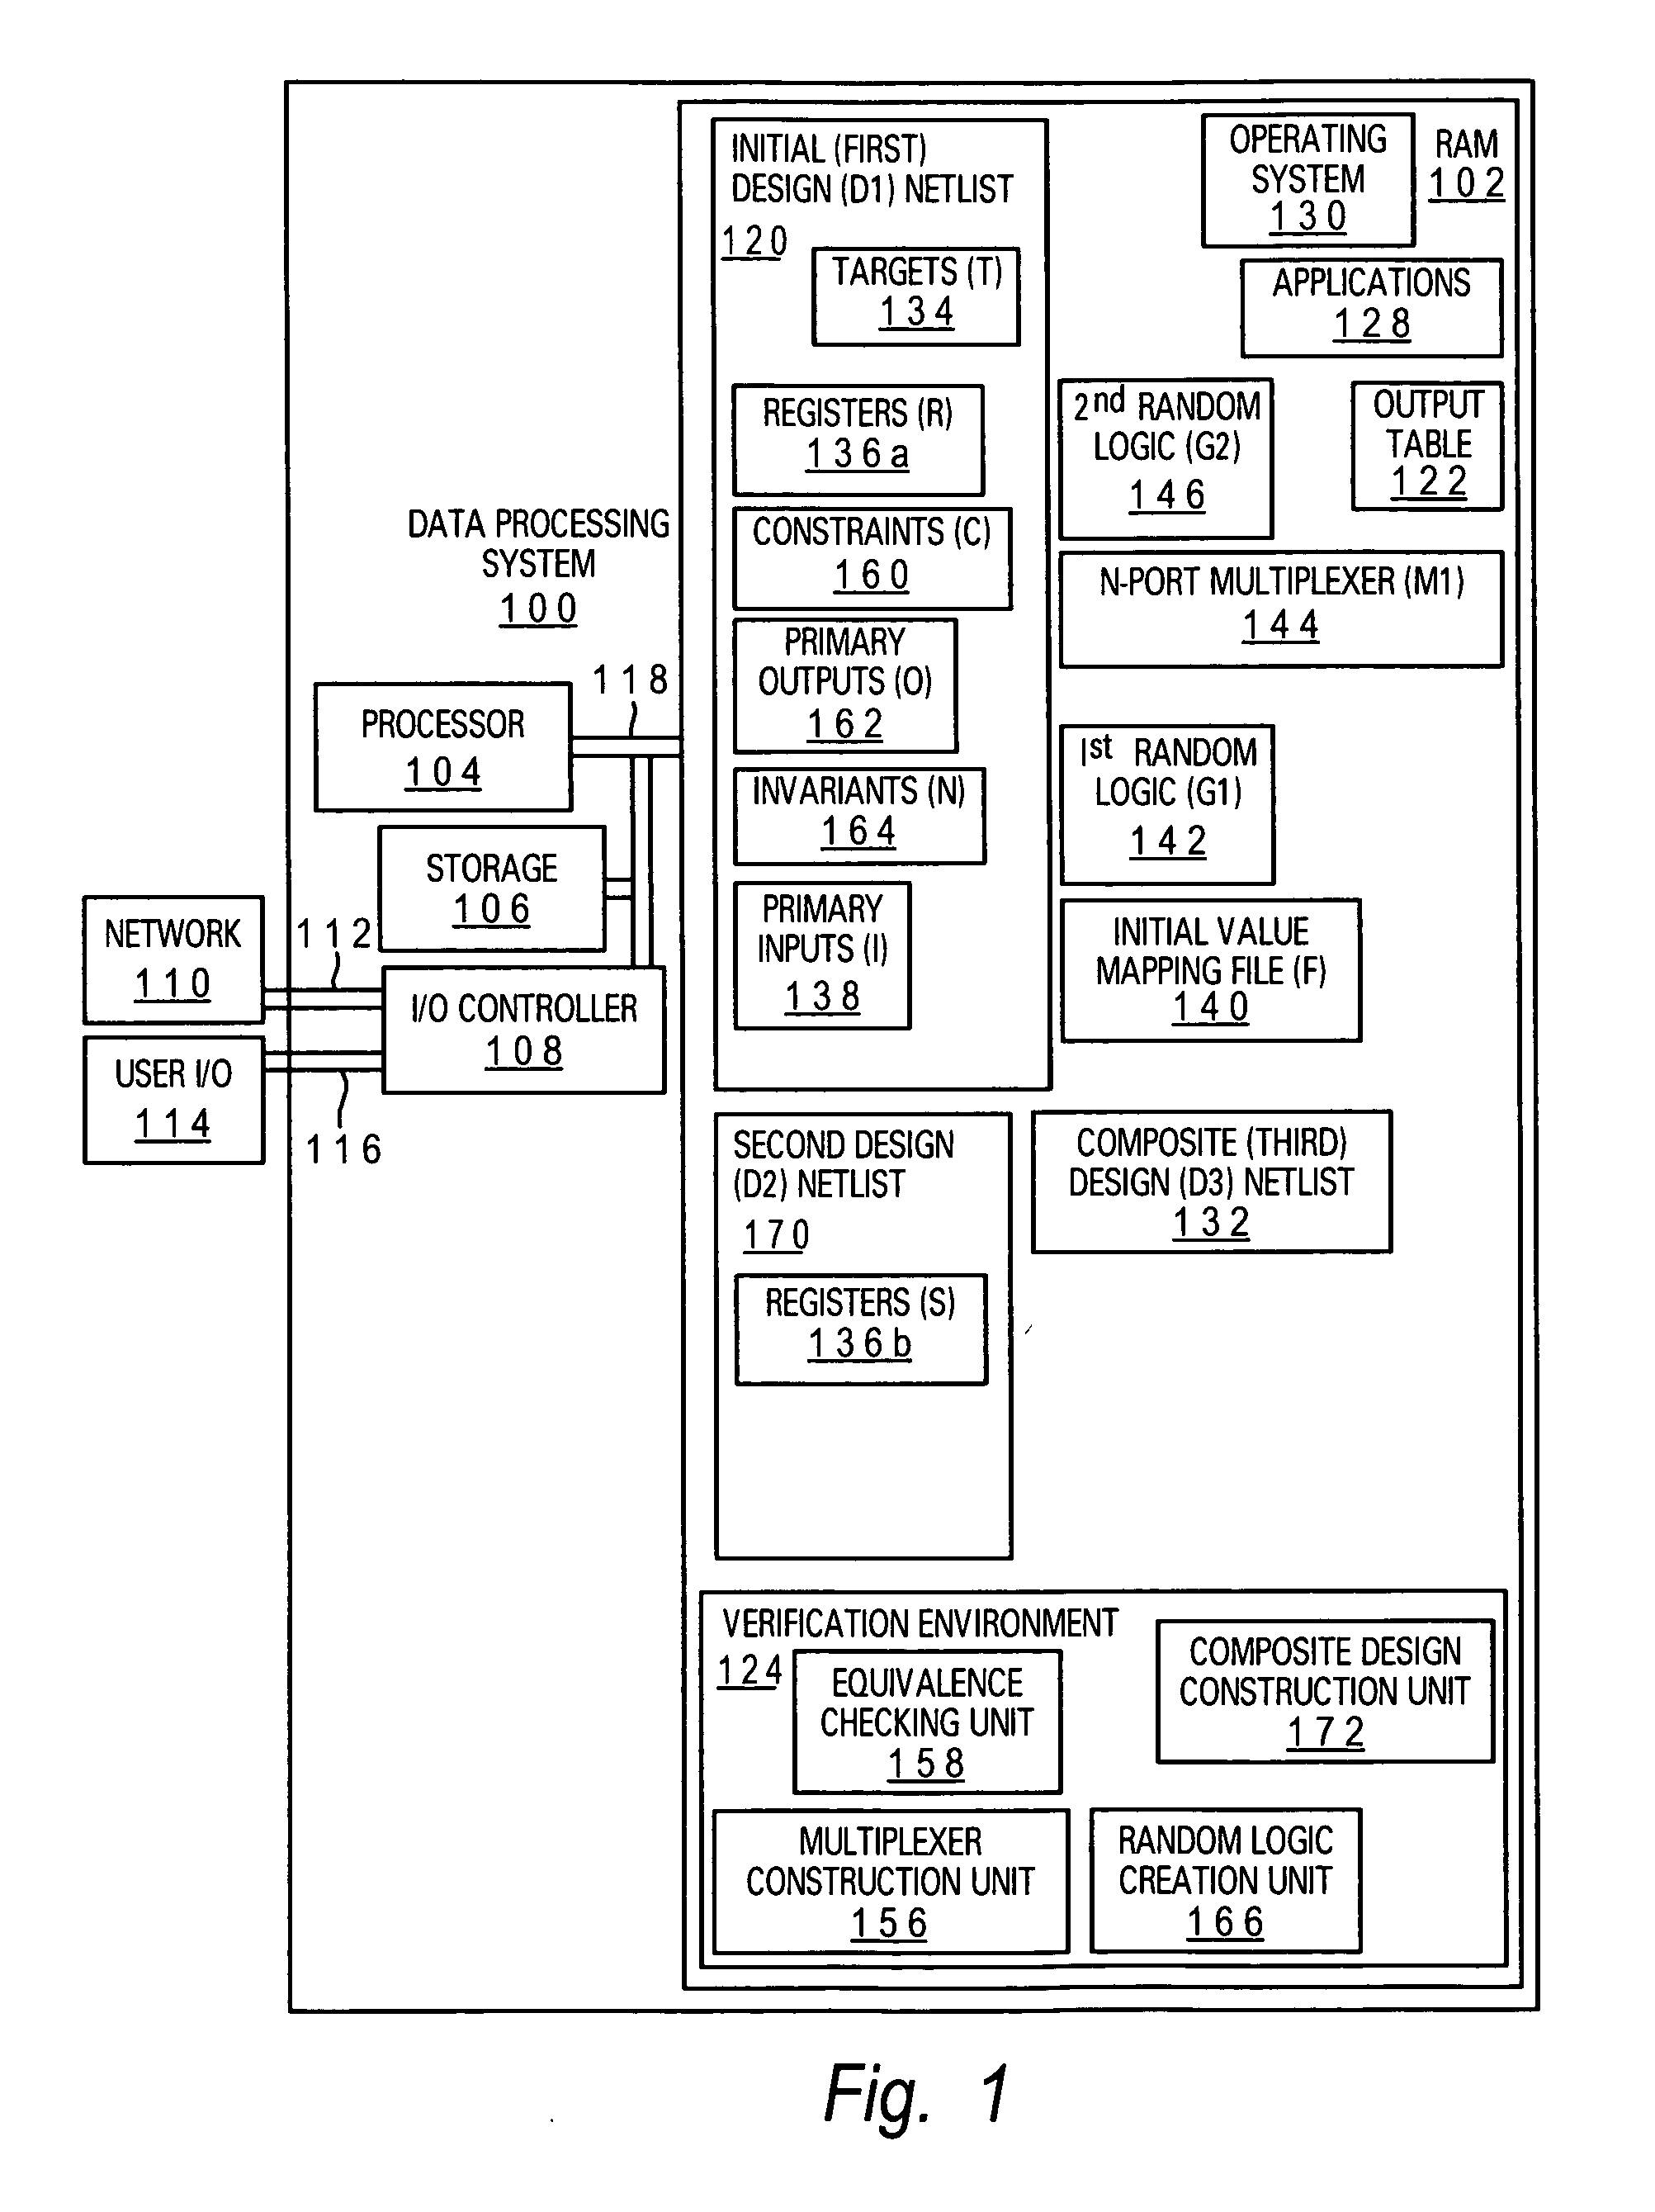 Method and system for sequential equivalence checking with multiple initial states